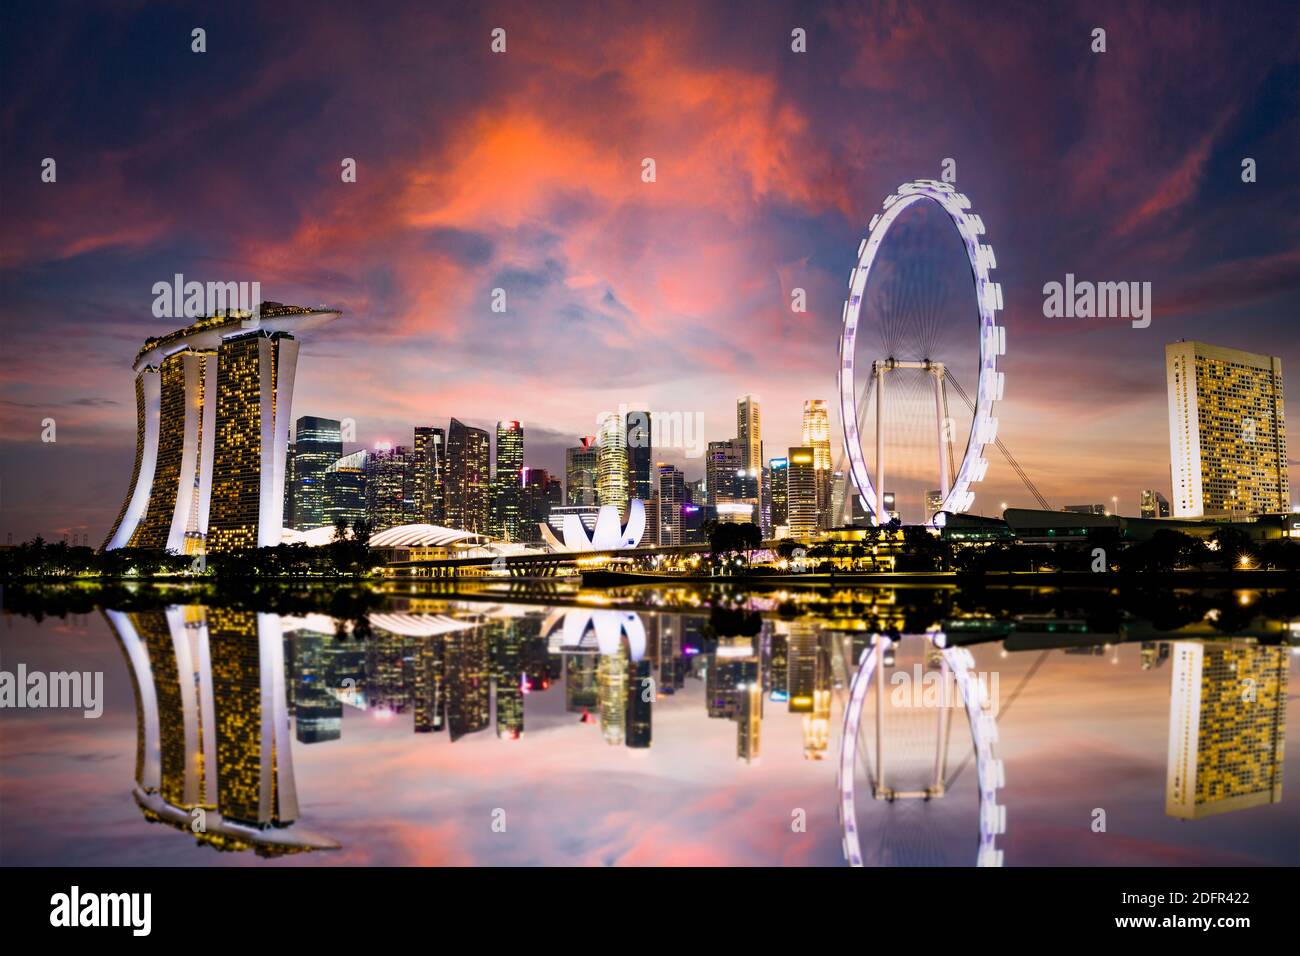 Stunning view of the Singapore's skyline during a beautiful and dramatic sunset.  Singapore is a sovereign island city-state in Southeast Asia. Stock Photo